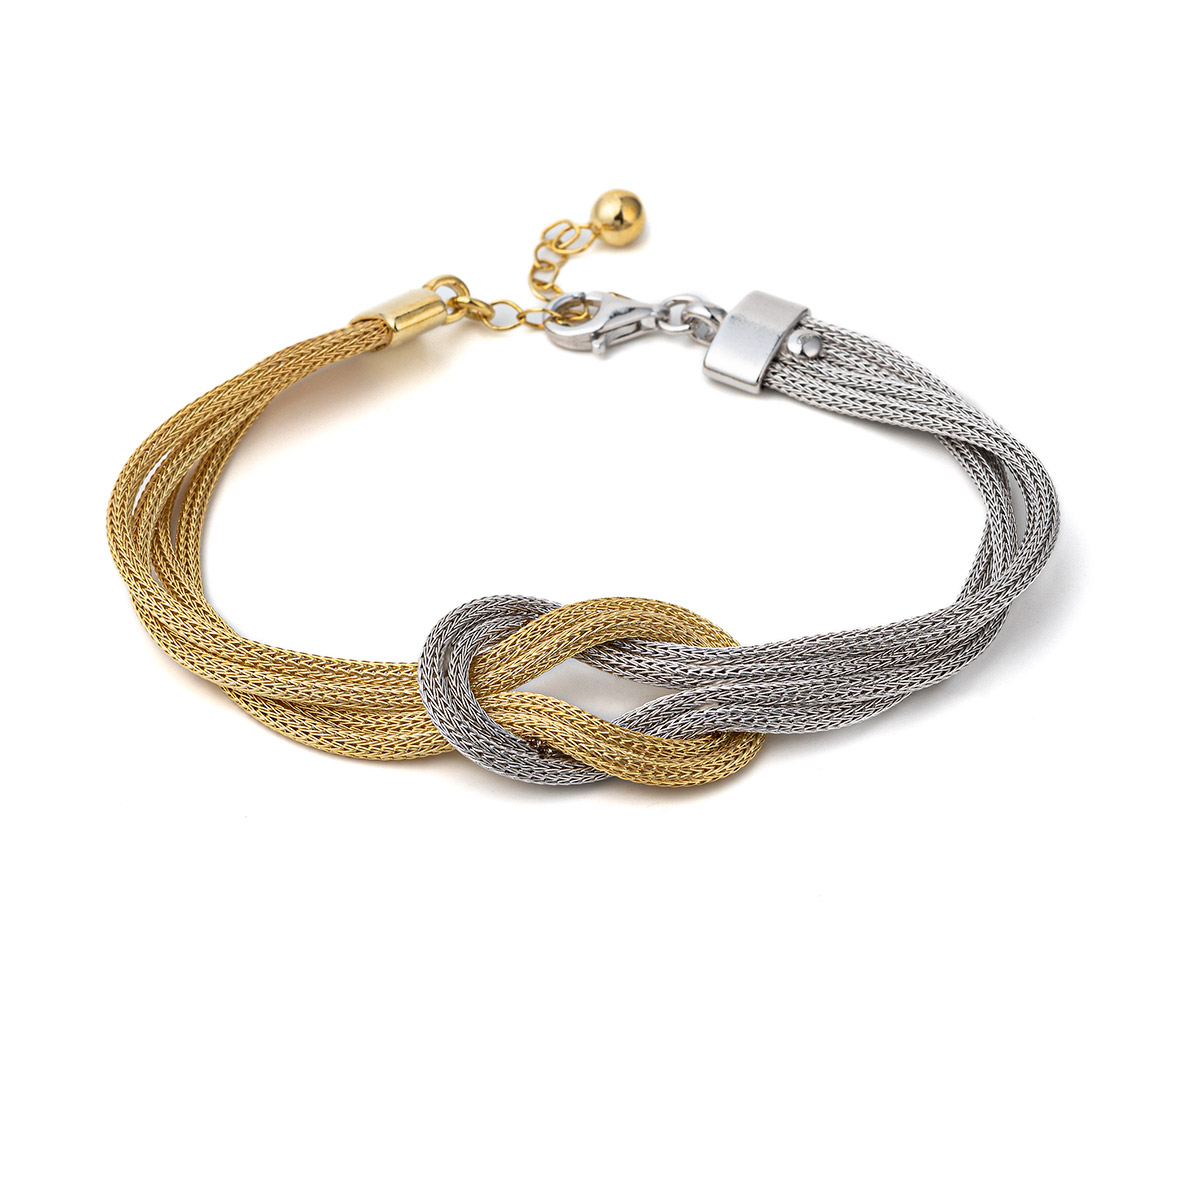 Knot Chain Bracelet - 925 Sterling Silver and Gold Plated